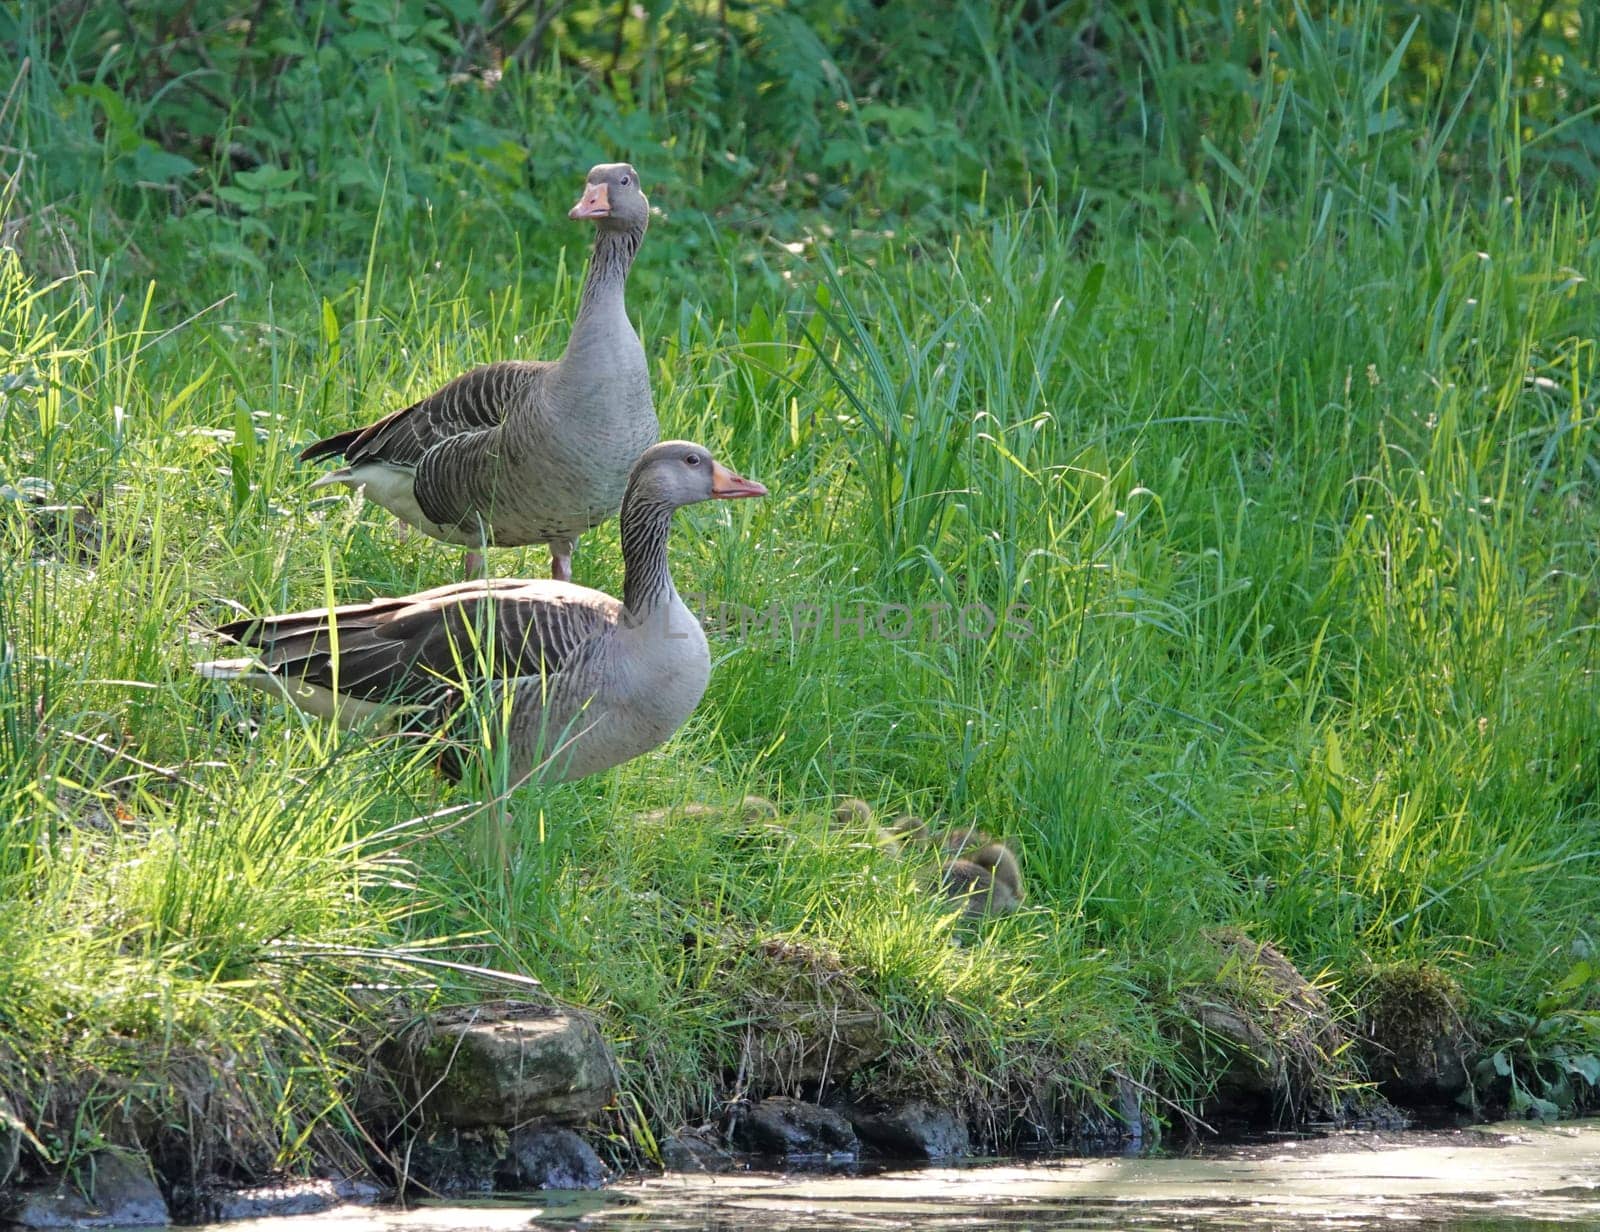 Greylag goose family stands in the grass at the edge of a pond. Father and mother look around warily. The youngsters hide in the grass